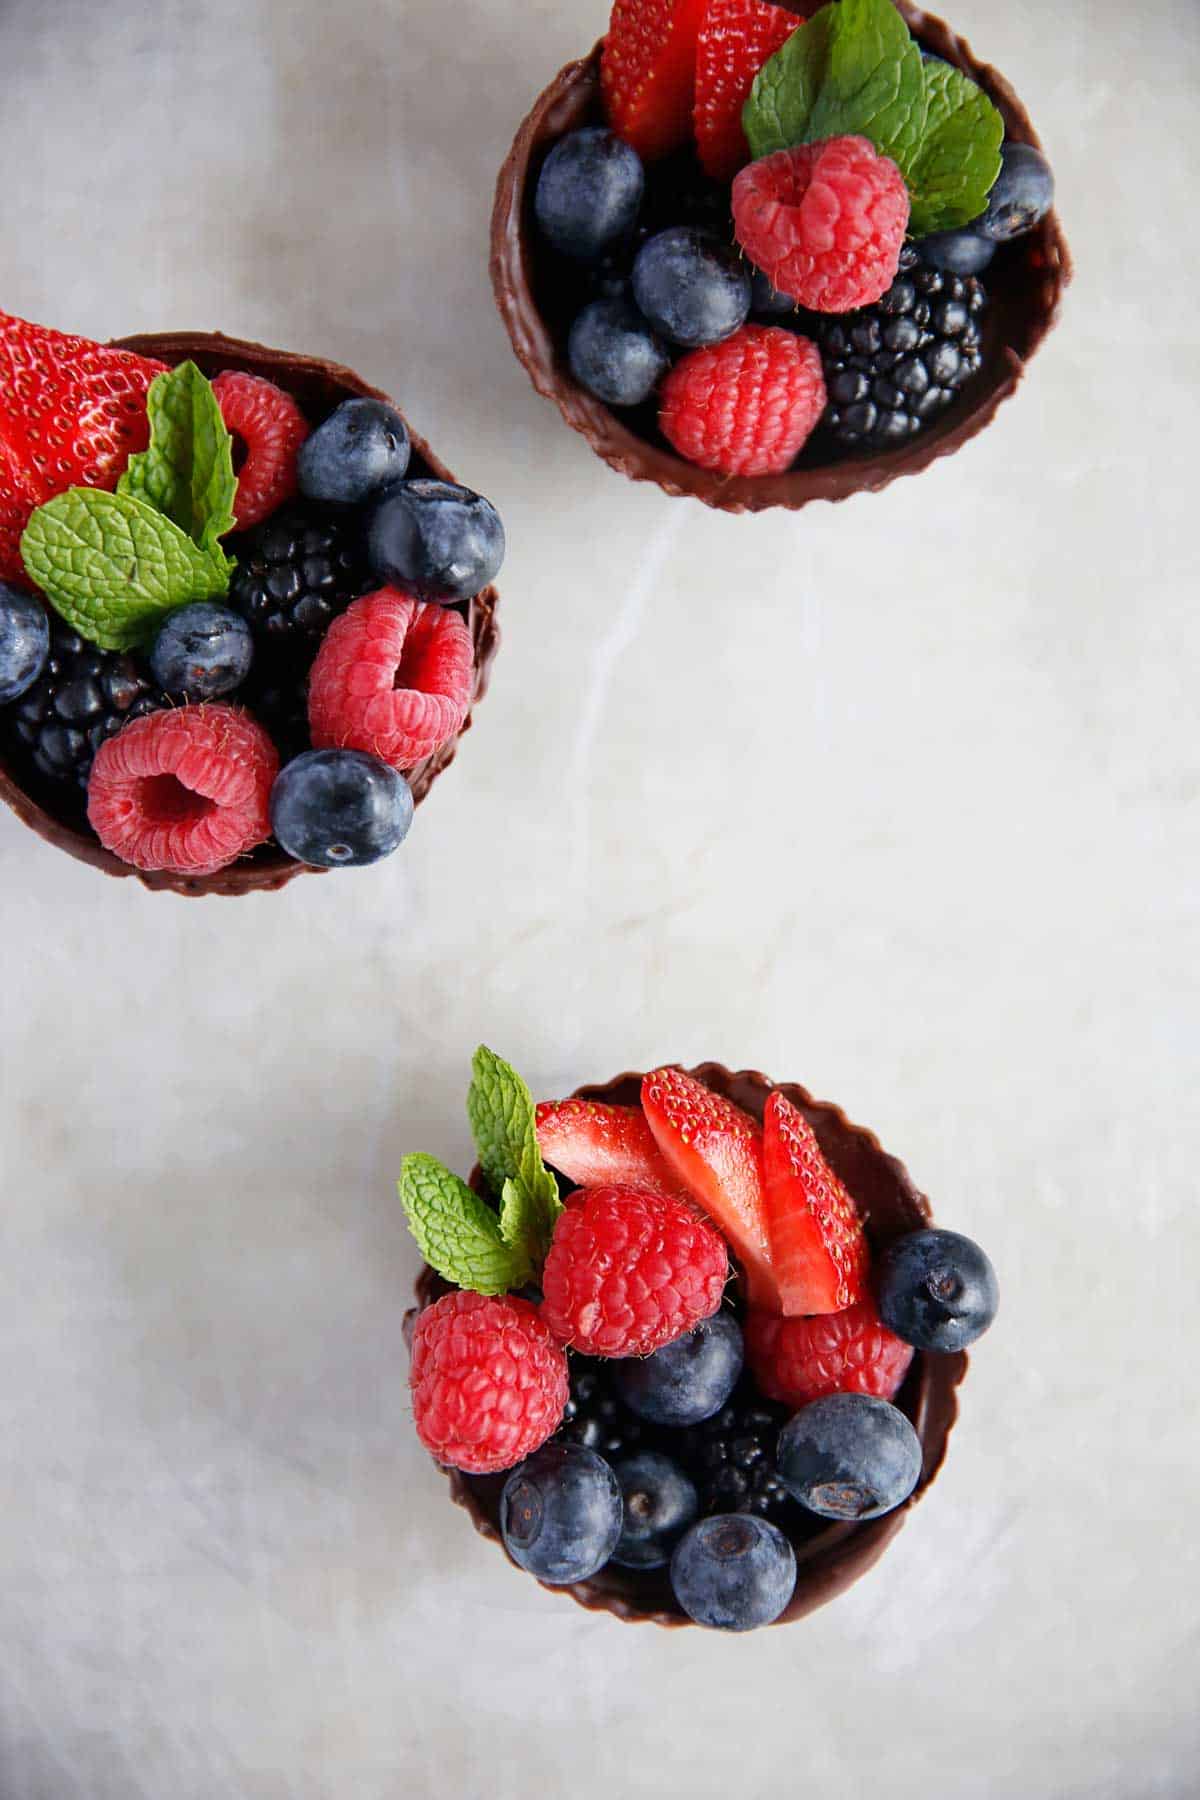 Chocolate cups filled with fruit